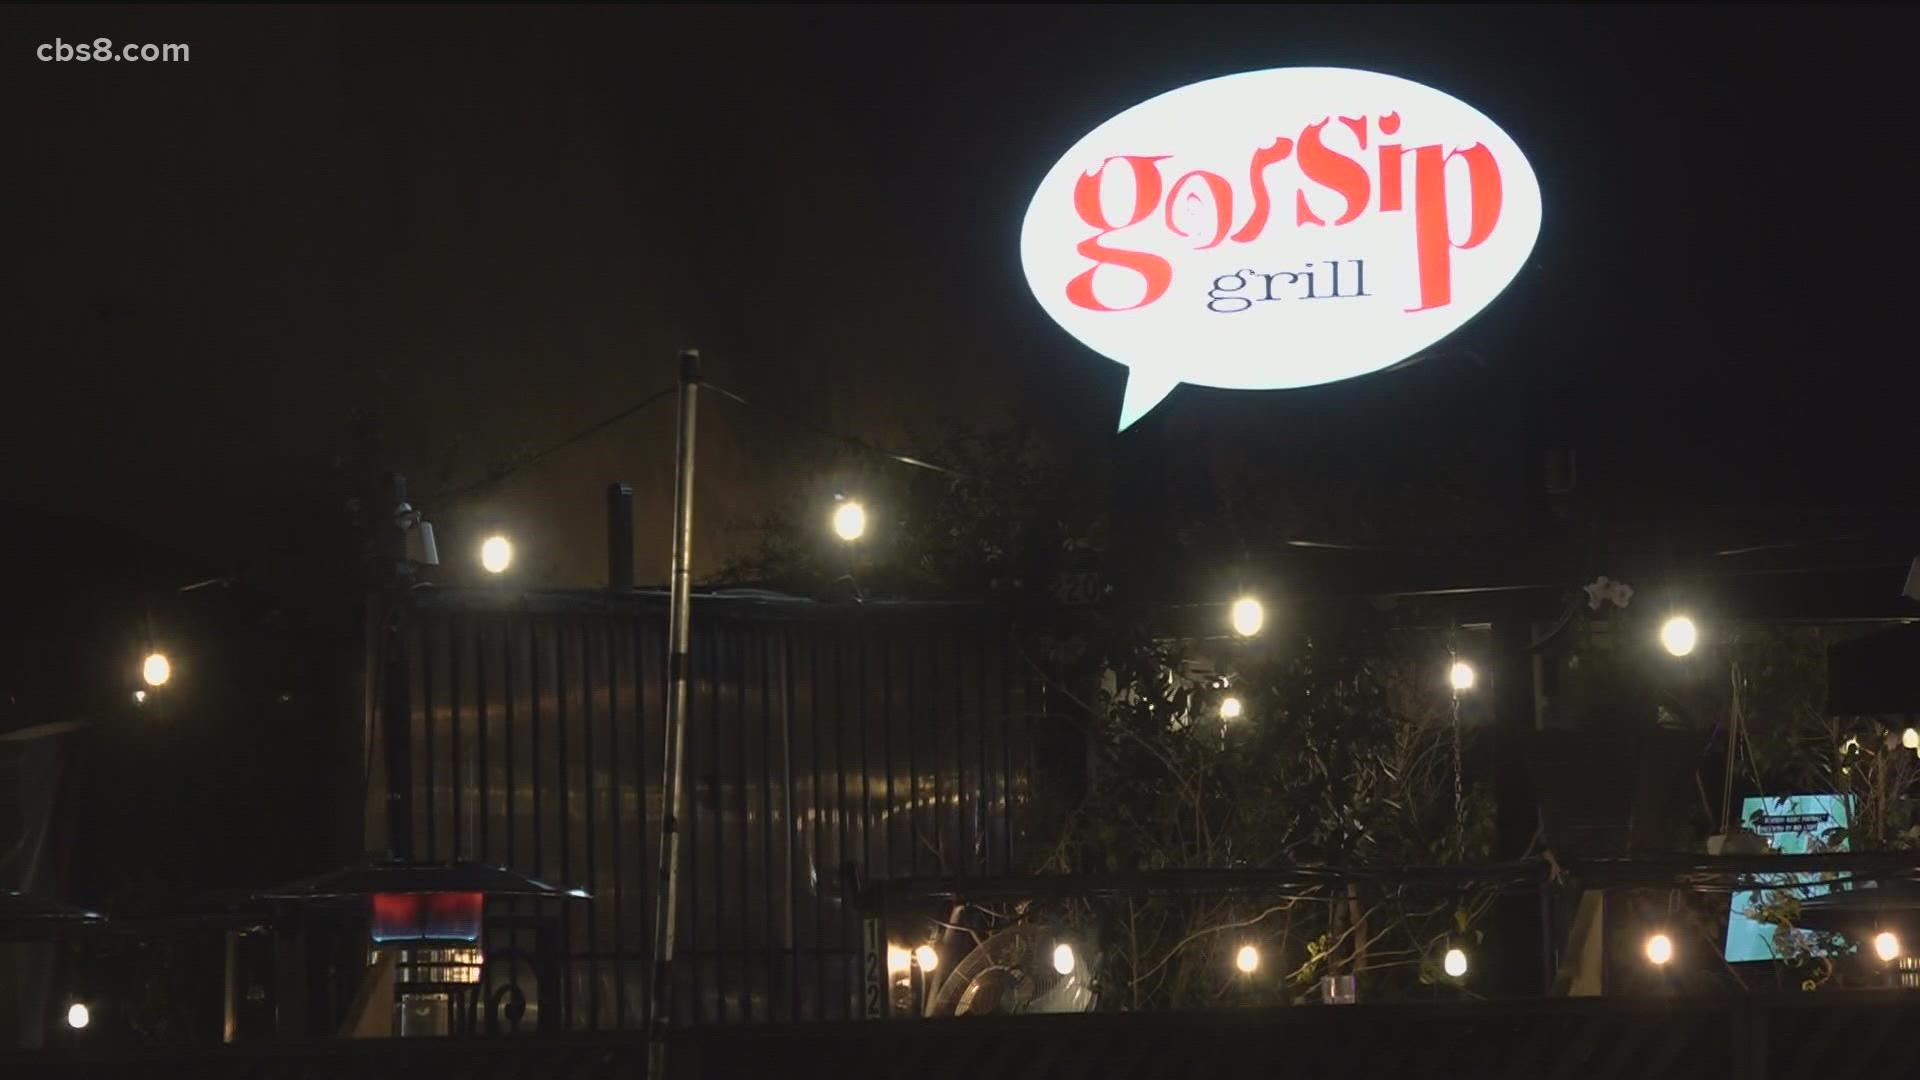 There are only 21 lesbian bars surviving in the U.S. and Gossip Grill in Hillcrest hopes to continue to provide a safe space for lesbians and trans communities.